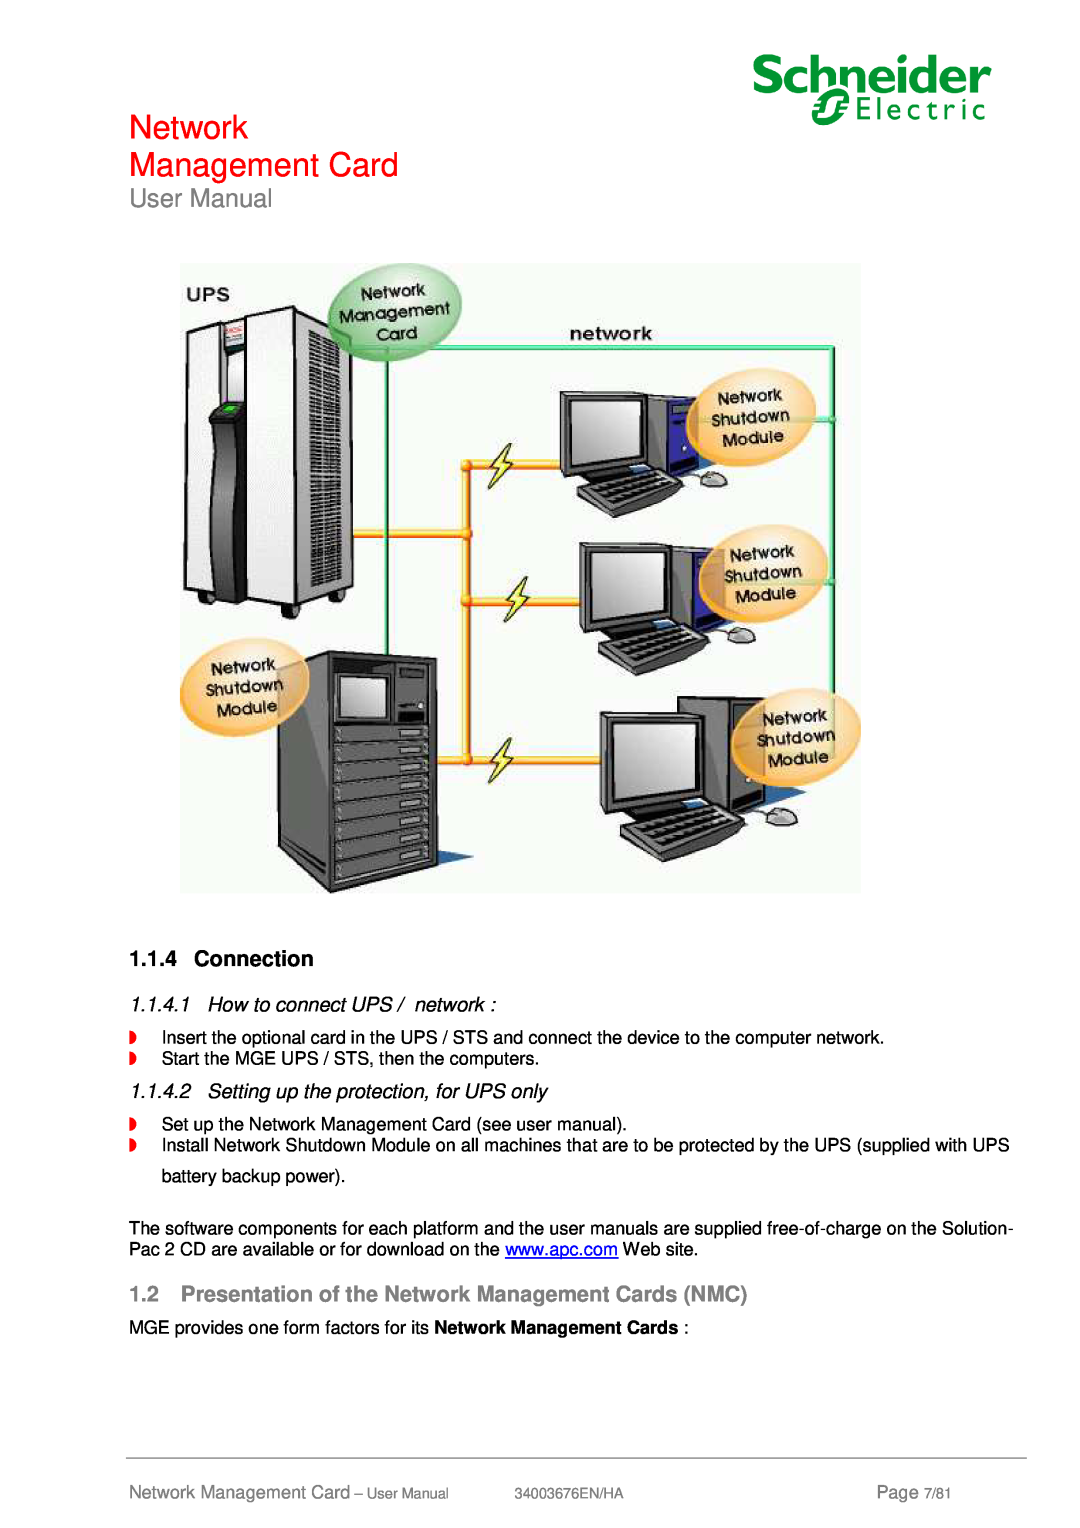 Schneider Electric 66074, 66846 Connection, Presentation of the Network Management Cards NMC, User Manual, Page 7/81 